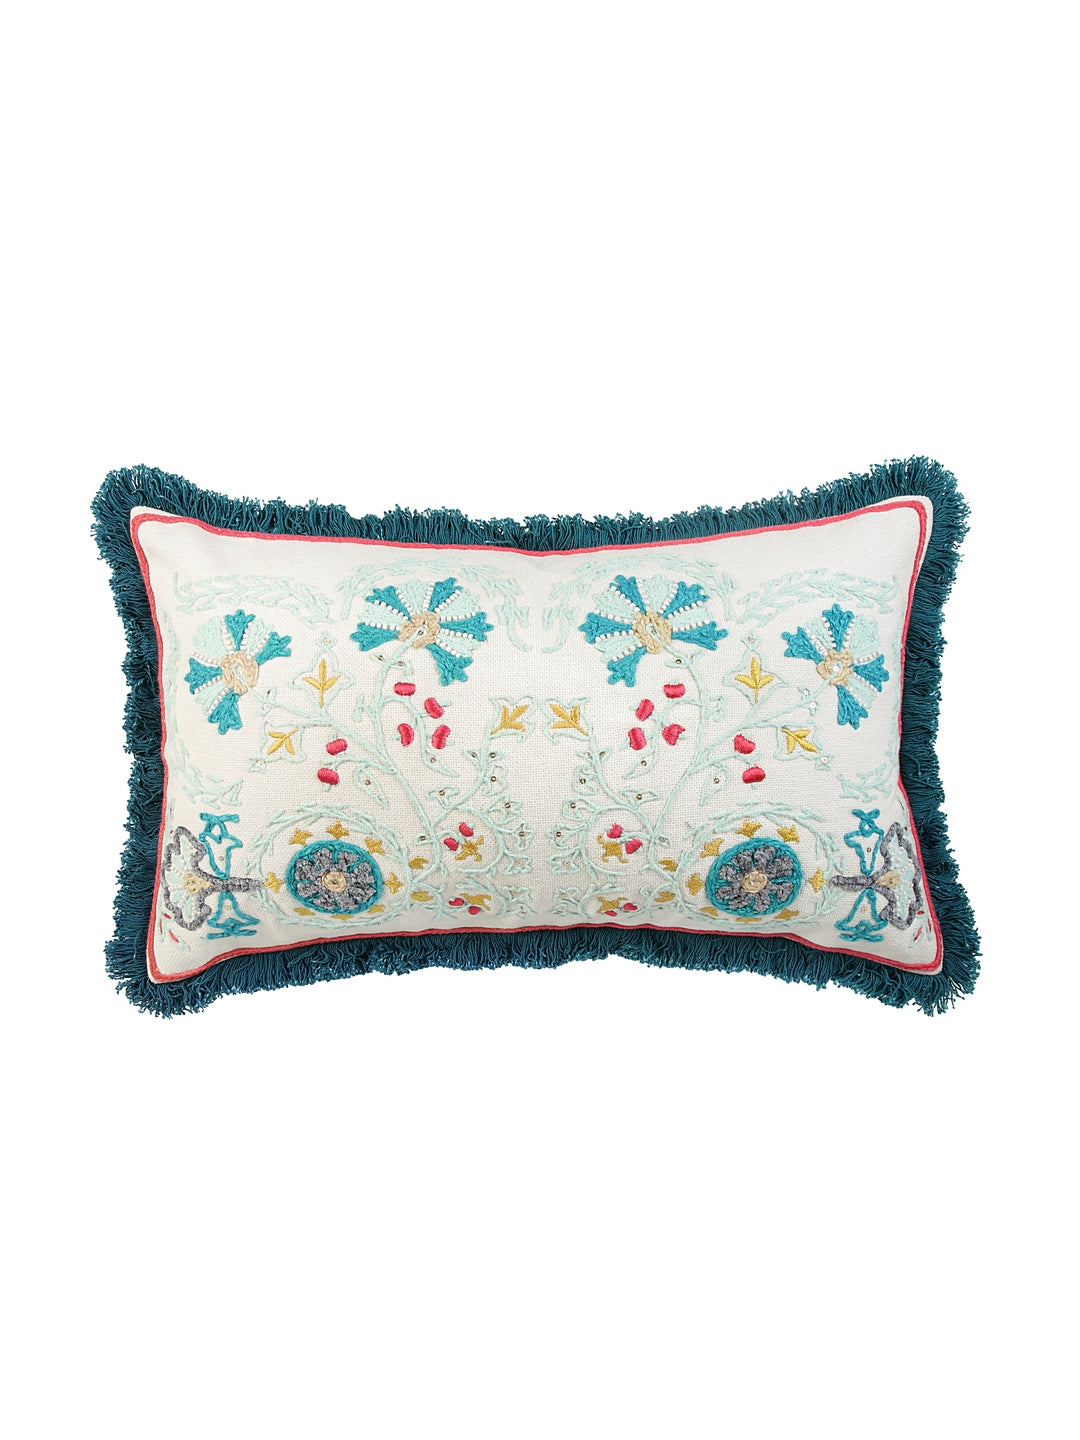 Blanc9 Exclusive Crewel Embroidered Cushion Cover with Filler 30x50cm